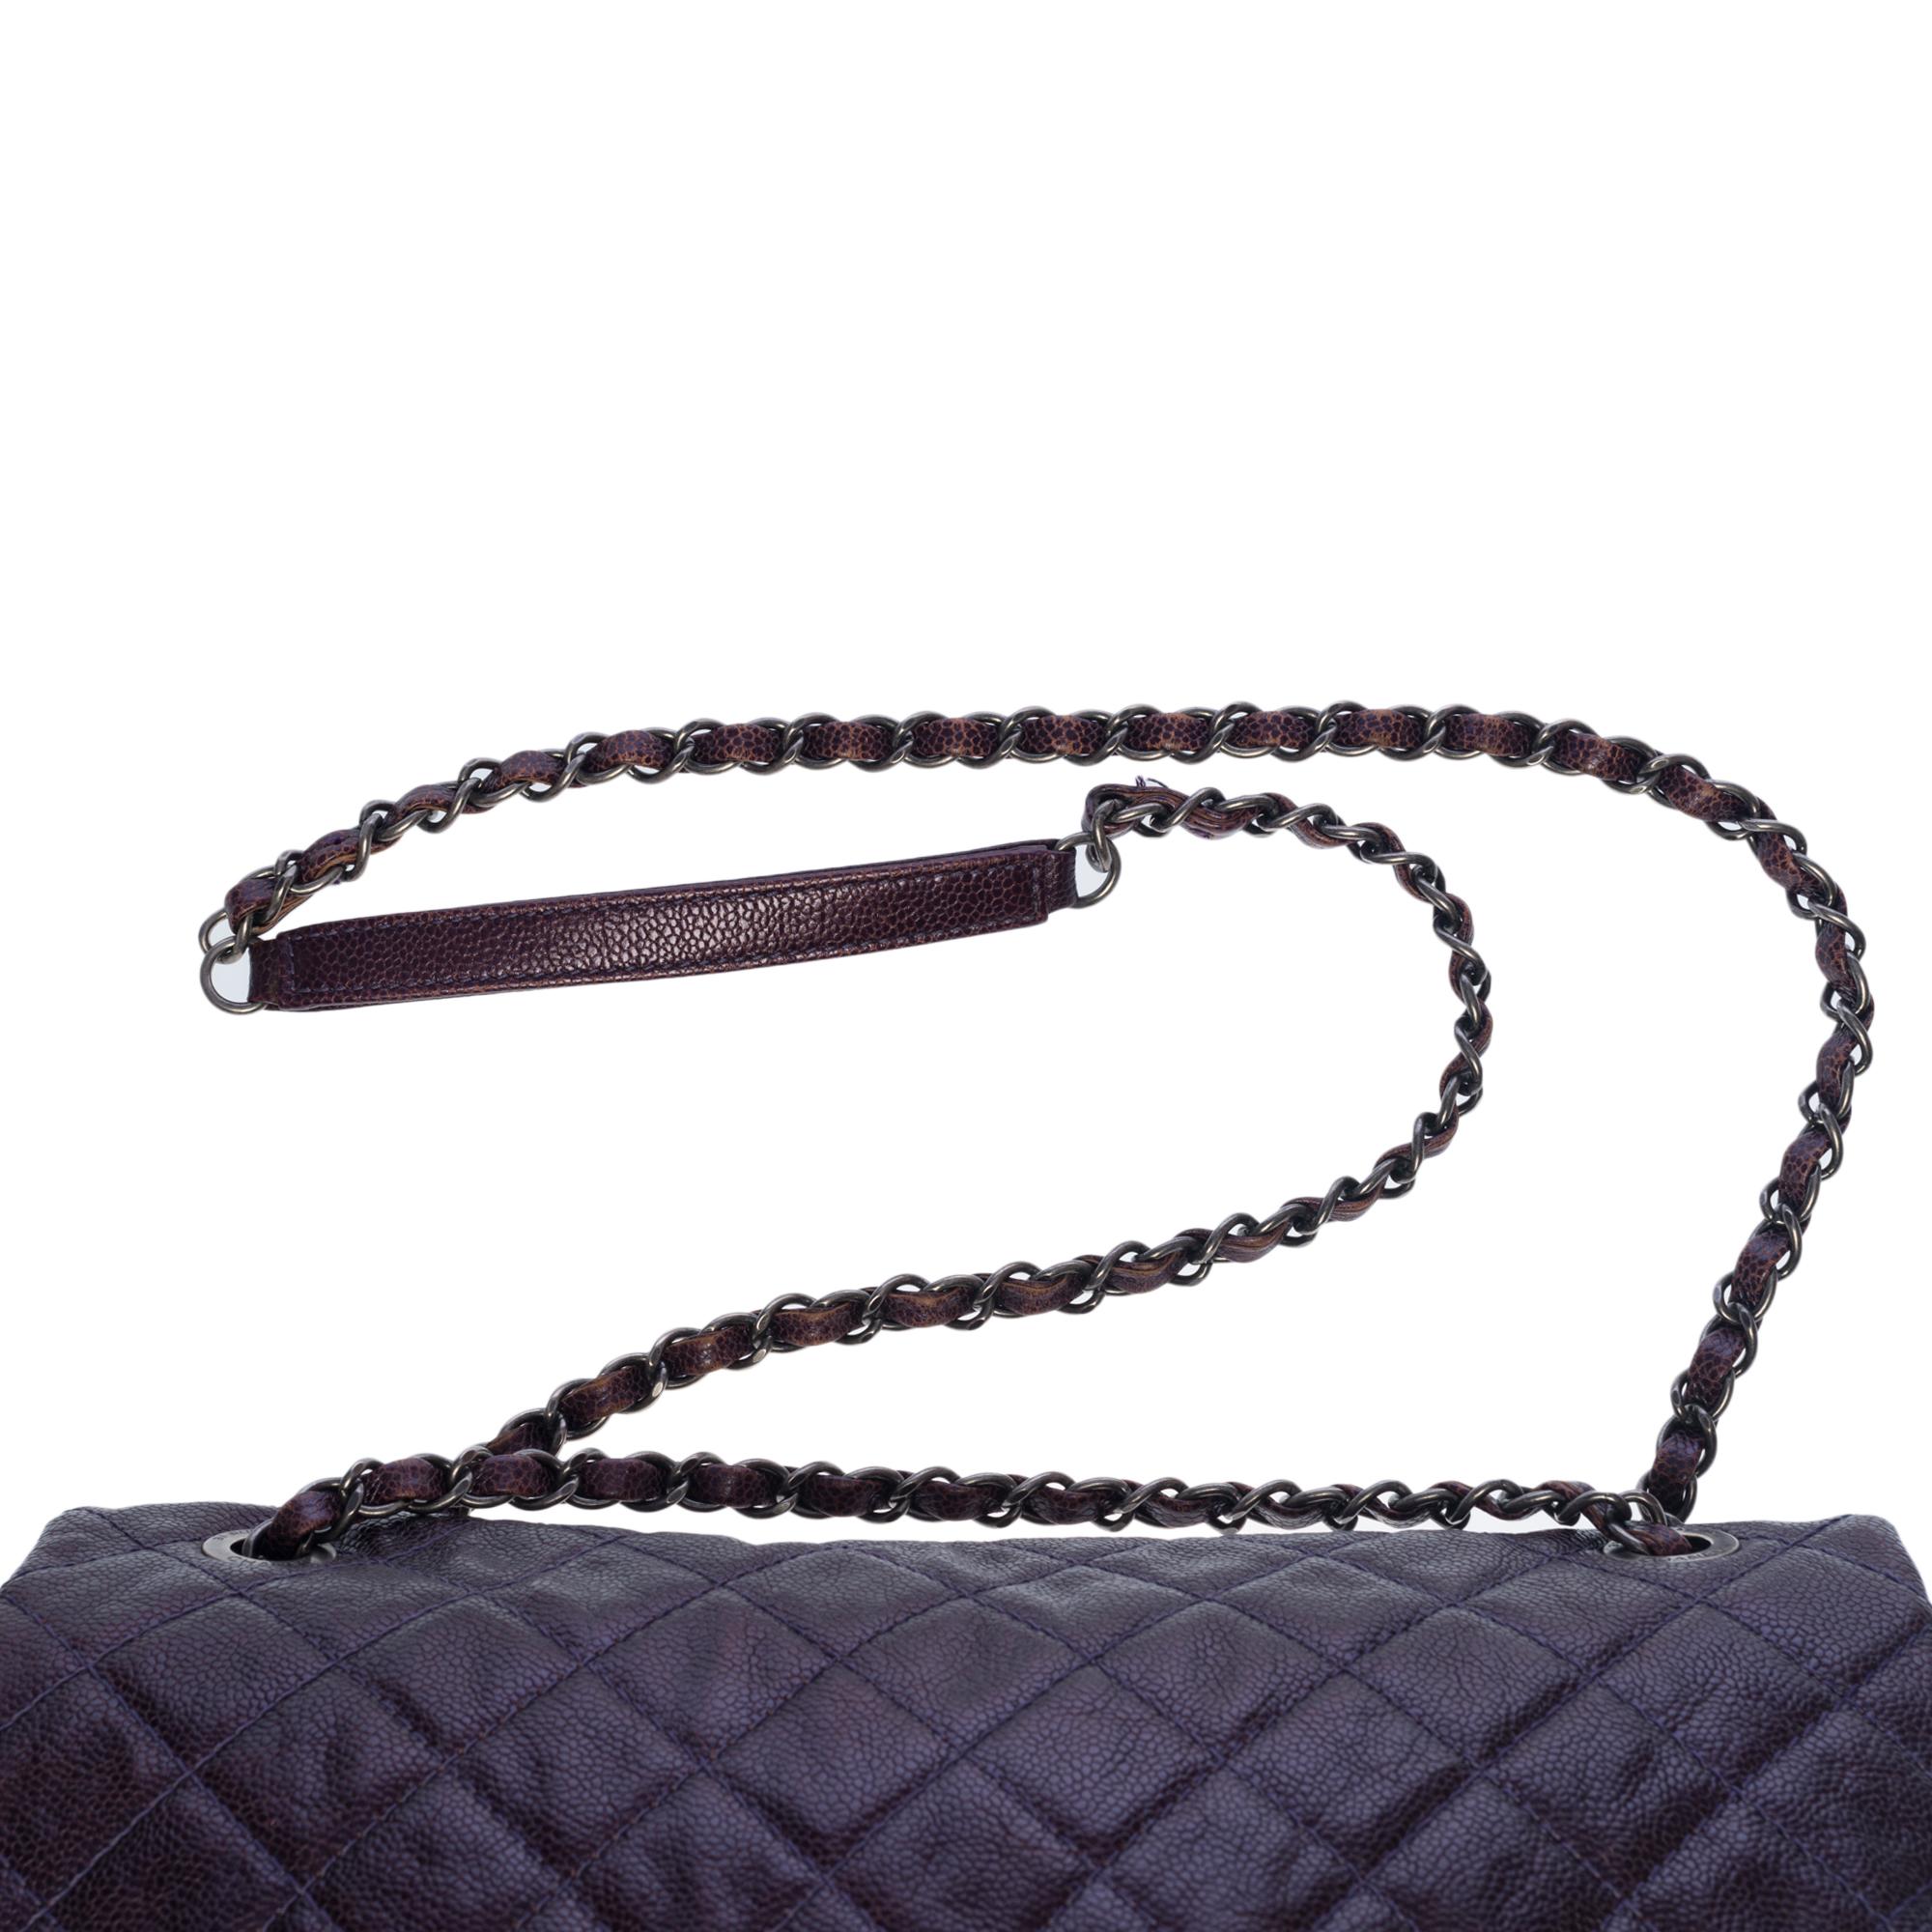 Stunning Chanel Classic shoulder flap bag in purple caviar leather, SHW 3